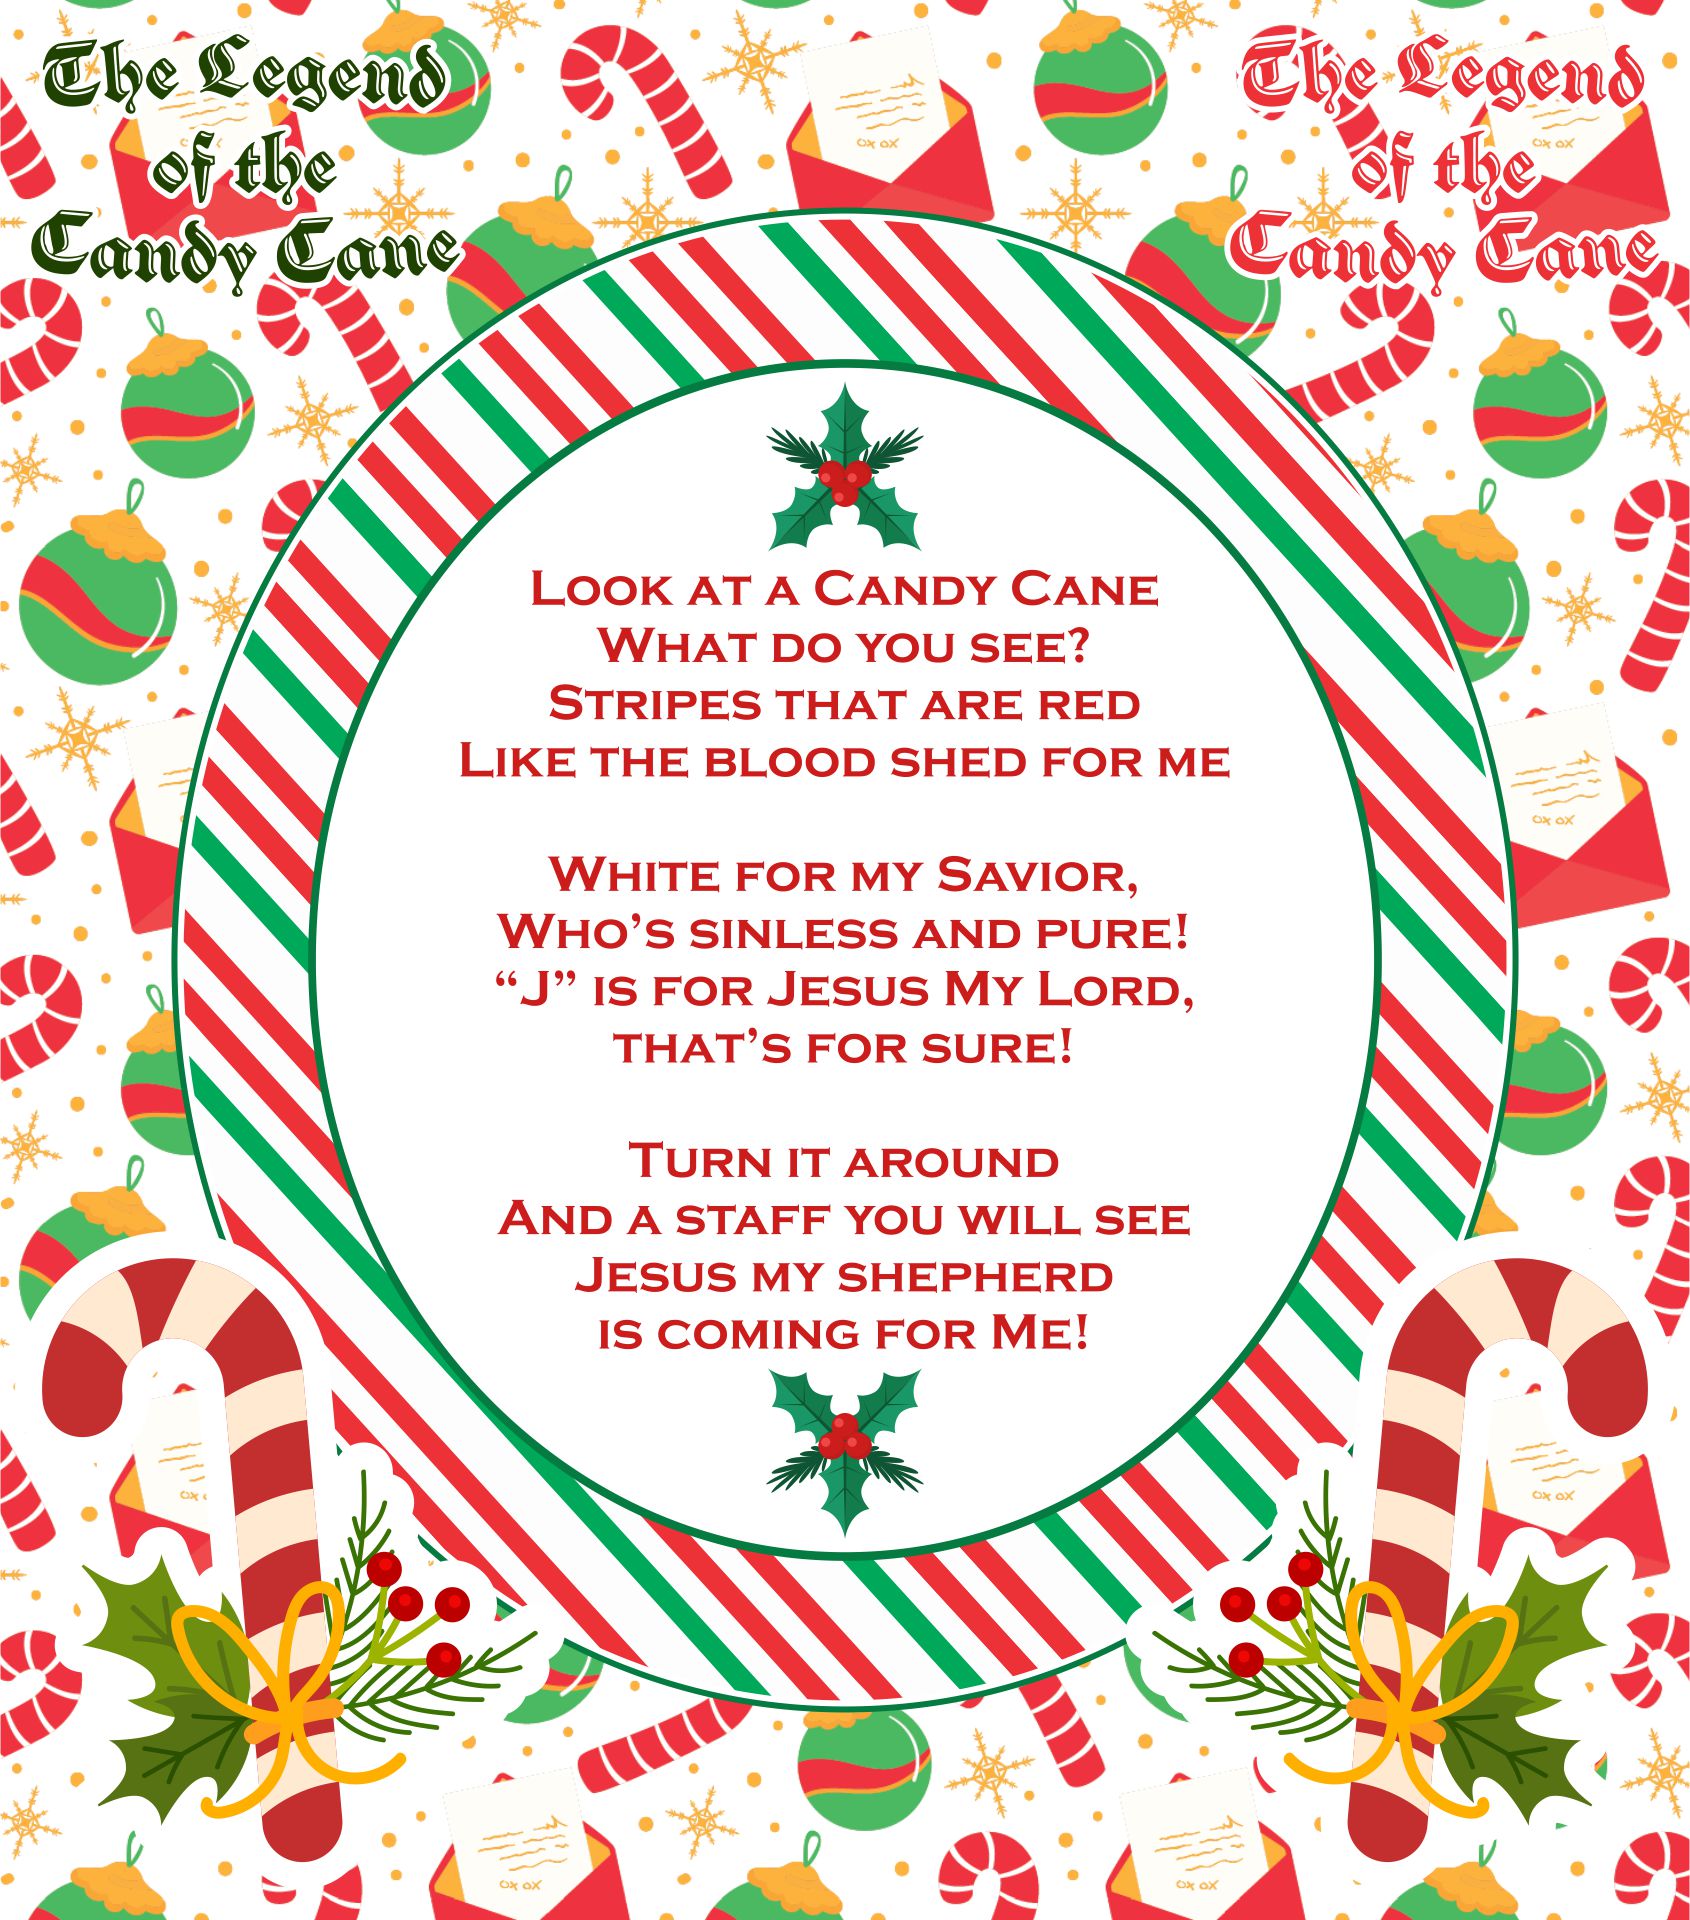 Christmas Candy Cane Story Poem